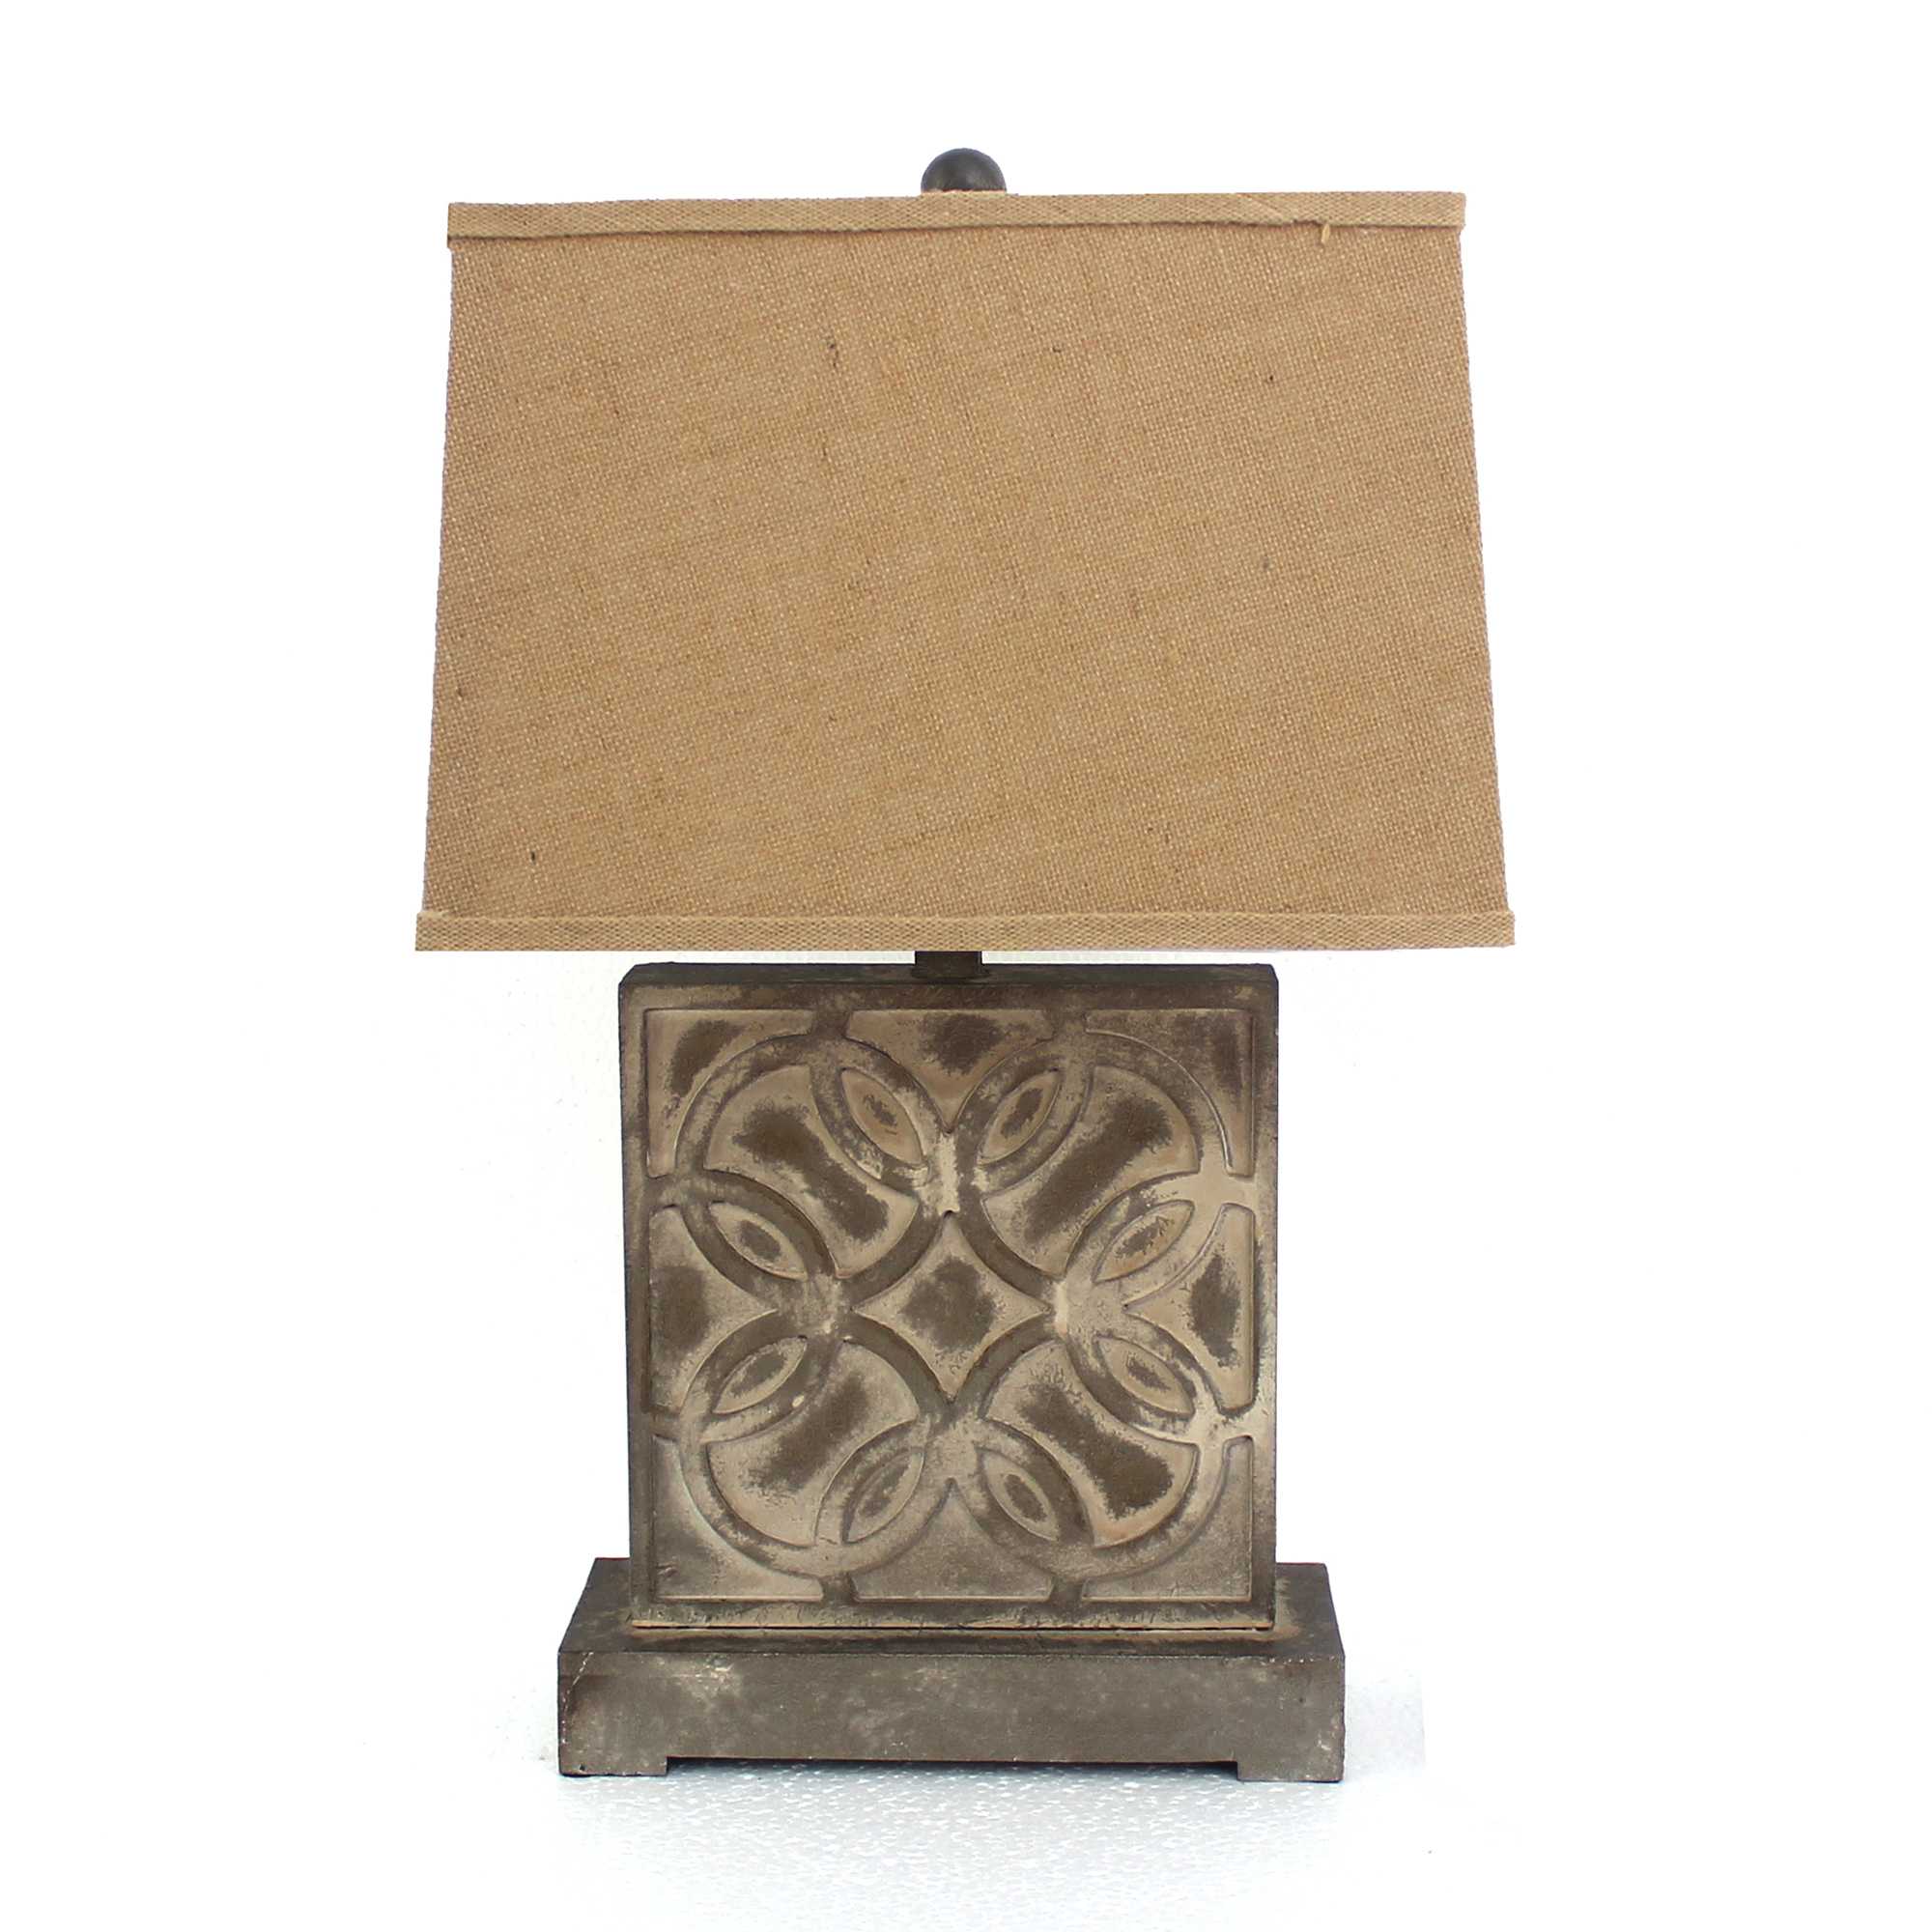 4.75" x 11.75" x 24.75" Brown, Vintage with Khaki Linen Shade - Table Lamp